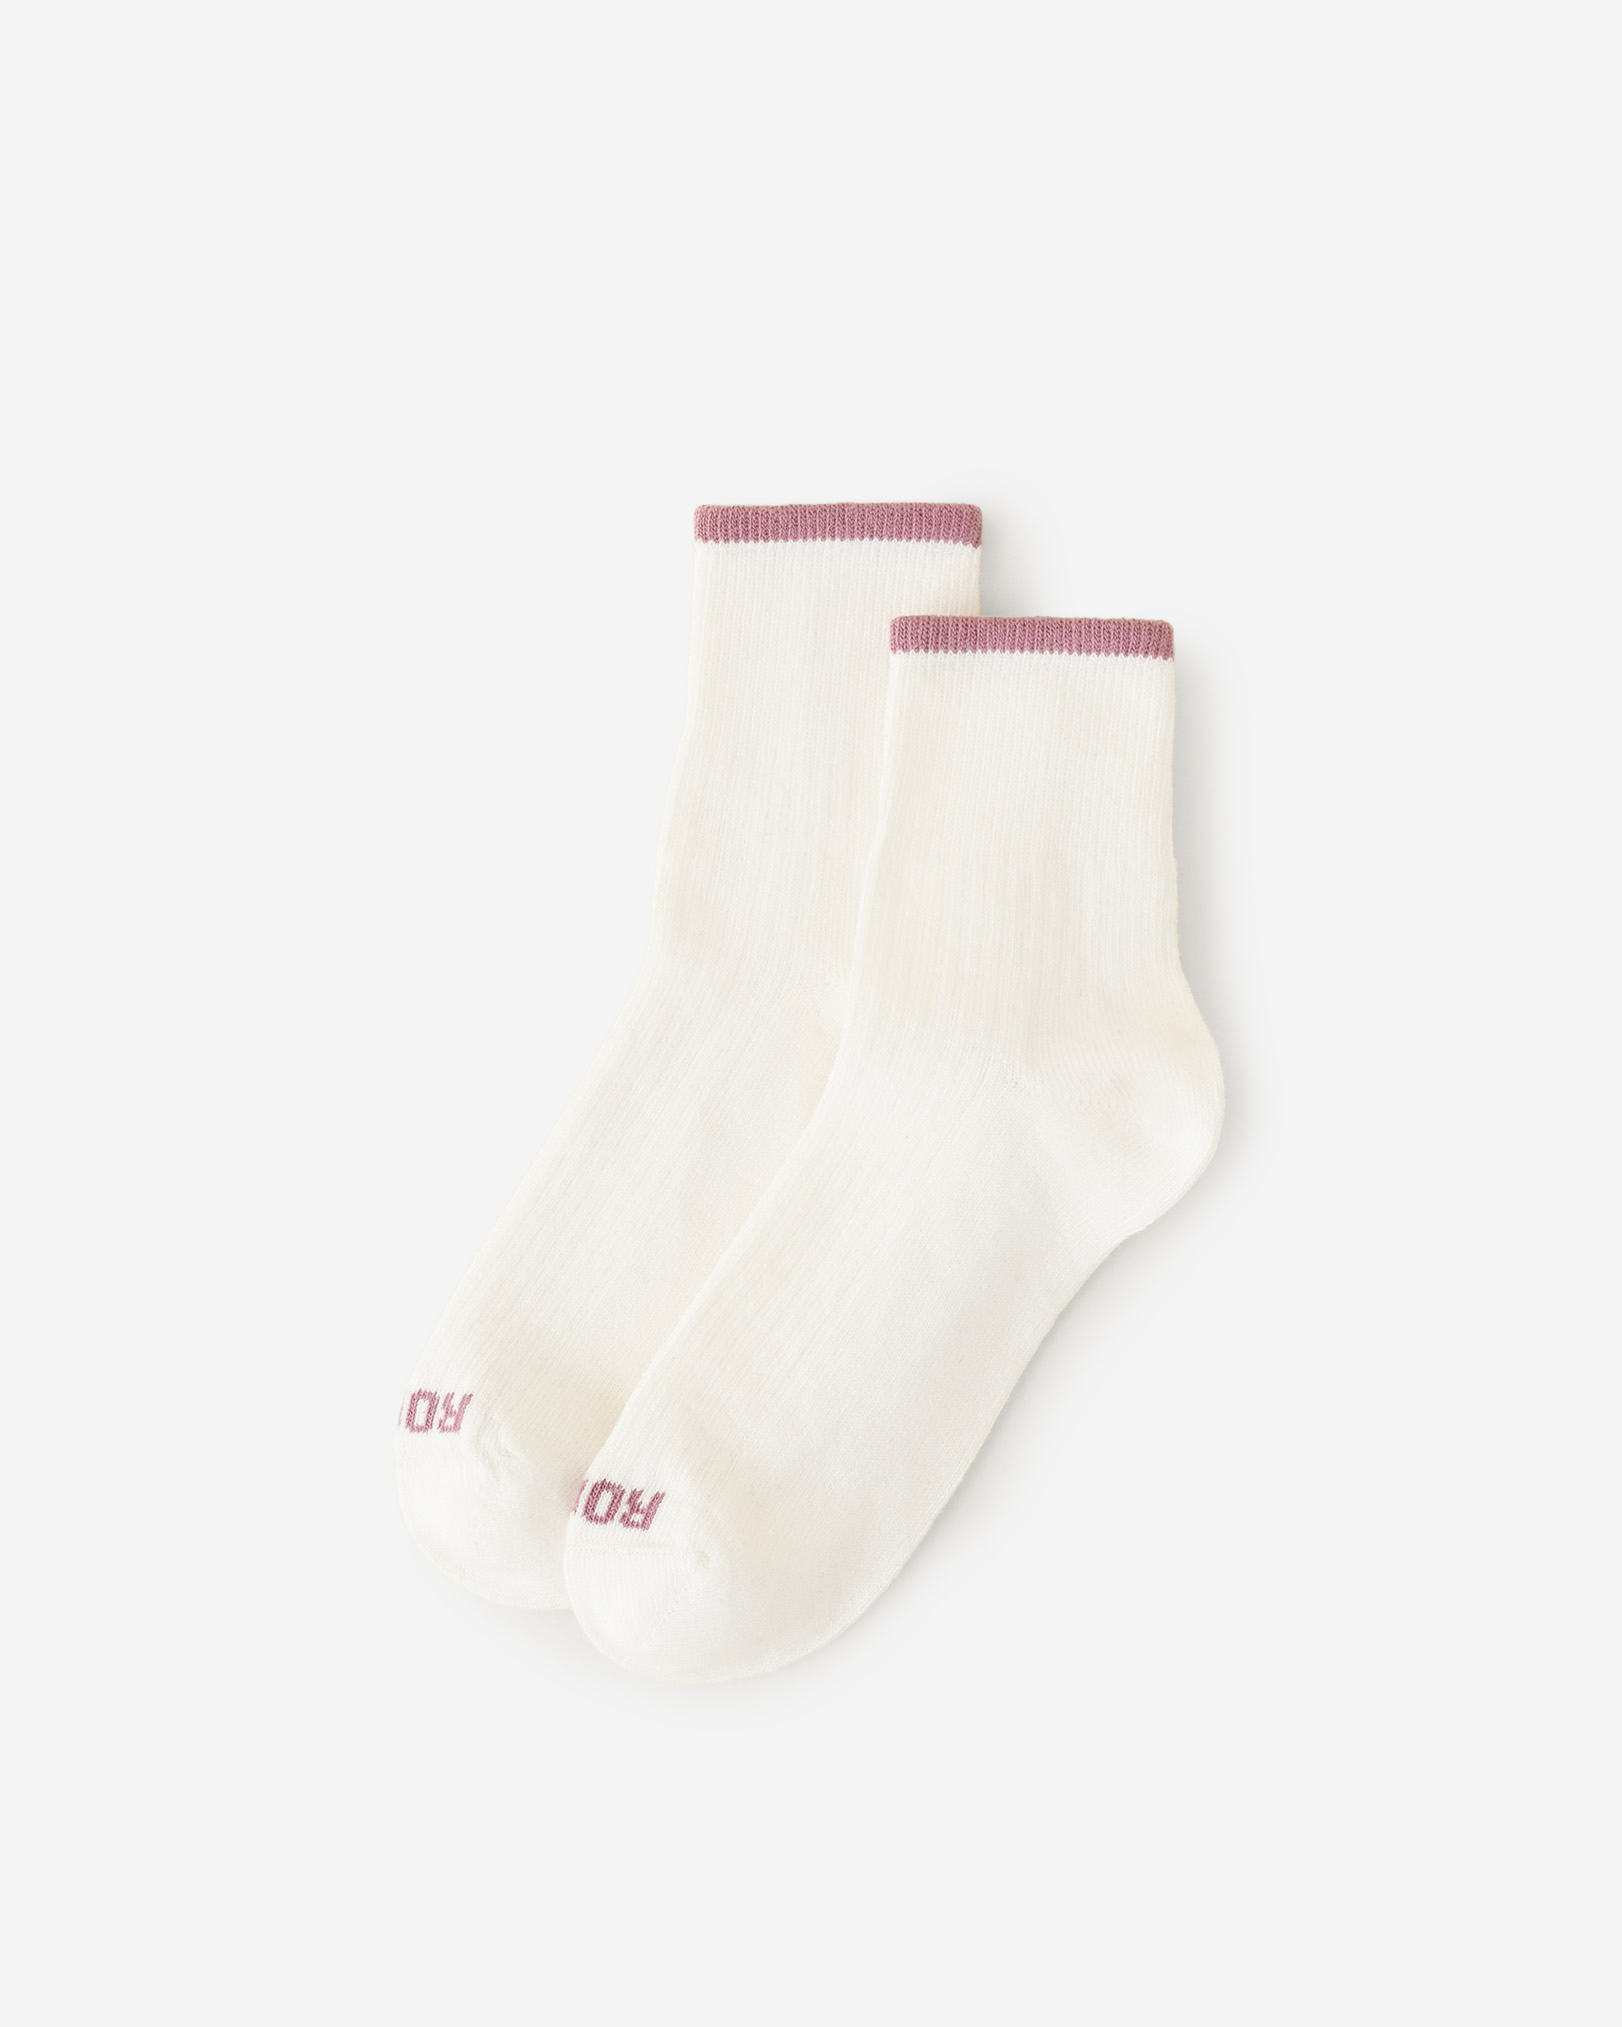 Roots Women's Cotton Ankle Sock in Vanilla Ice